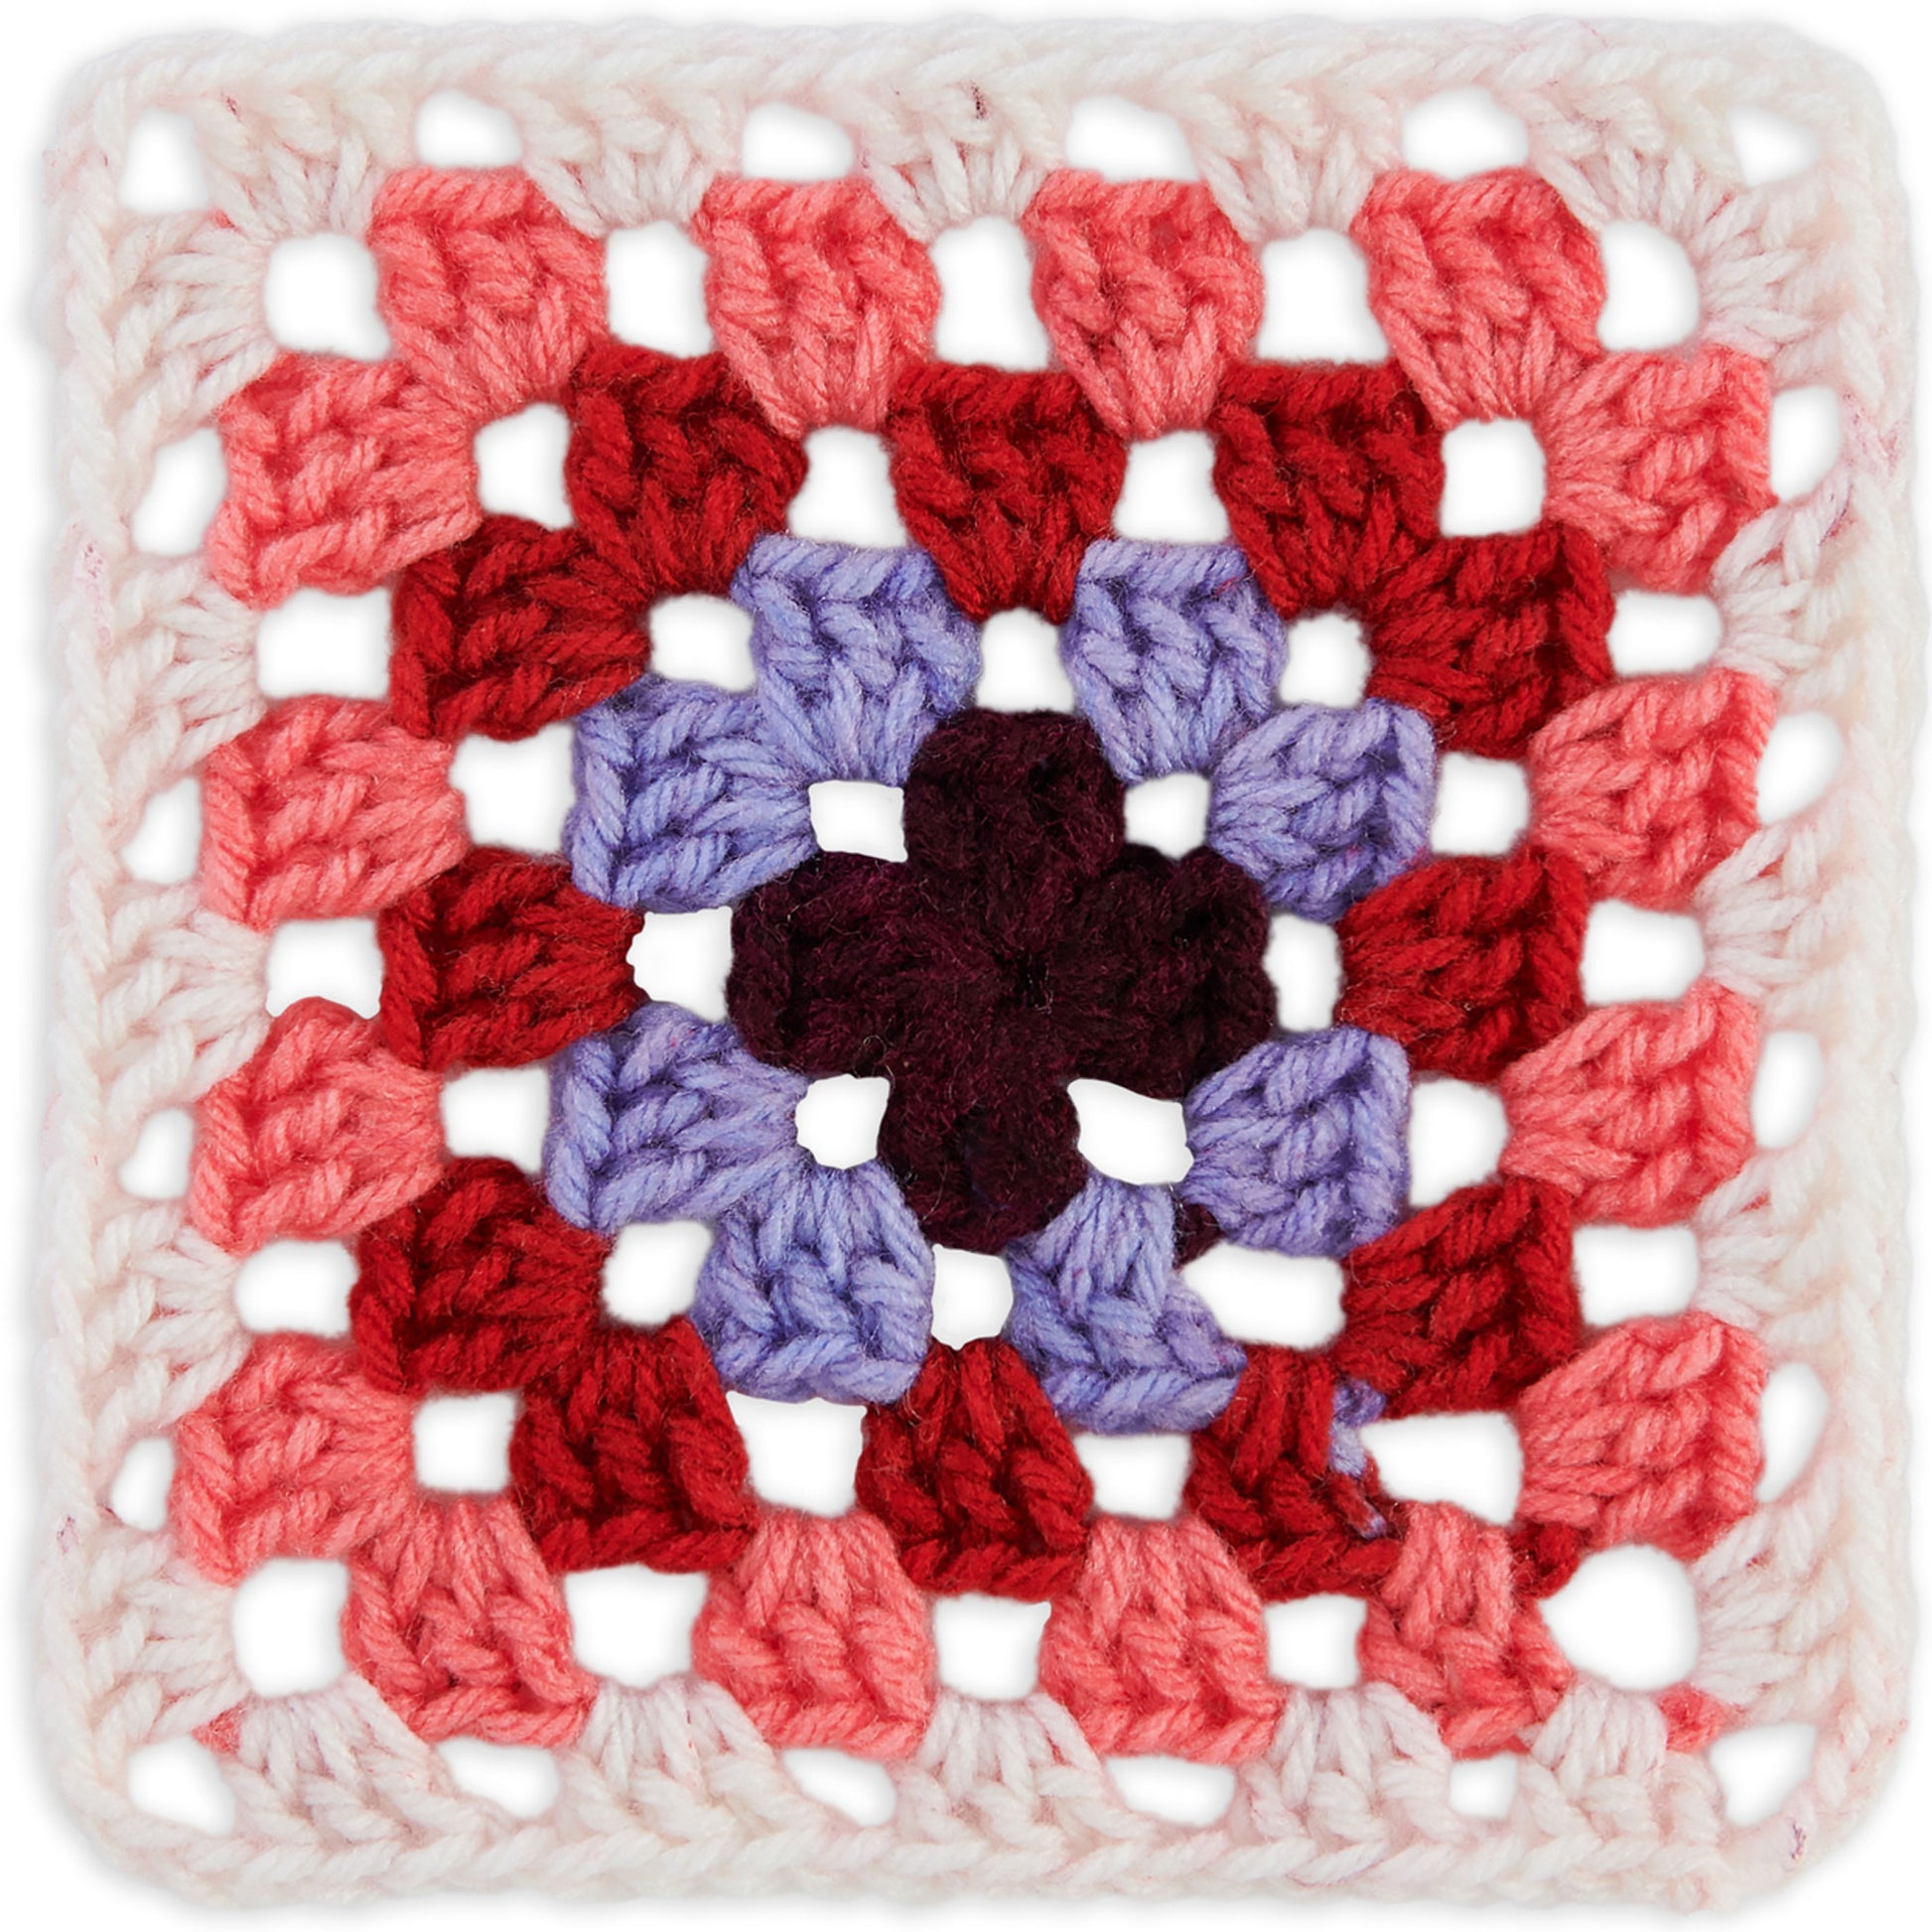 How to stitch a Red Heart All-In-One Granny Square